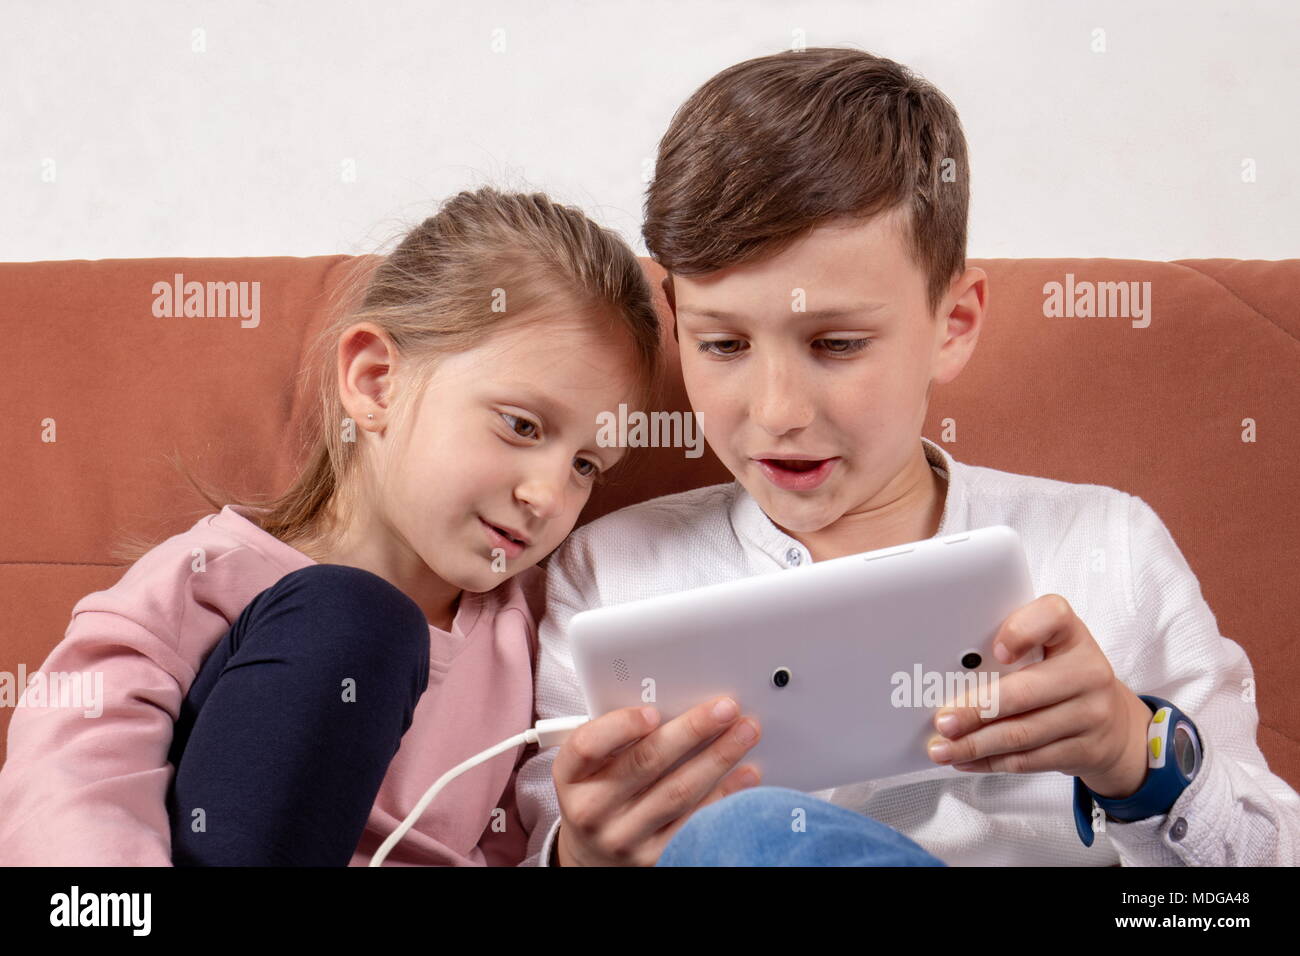 Girl and boy, sister and brother playing together with digital tablet Stock Photo